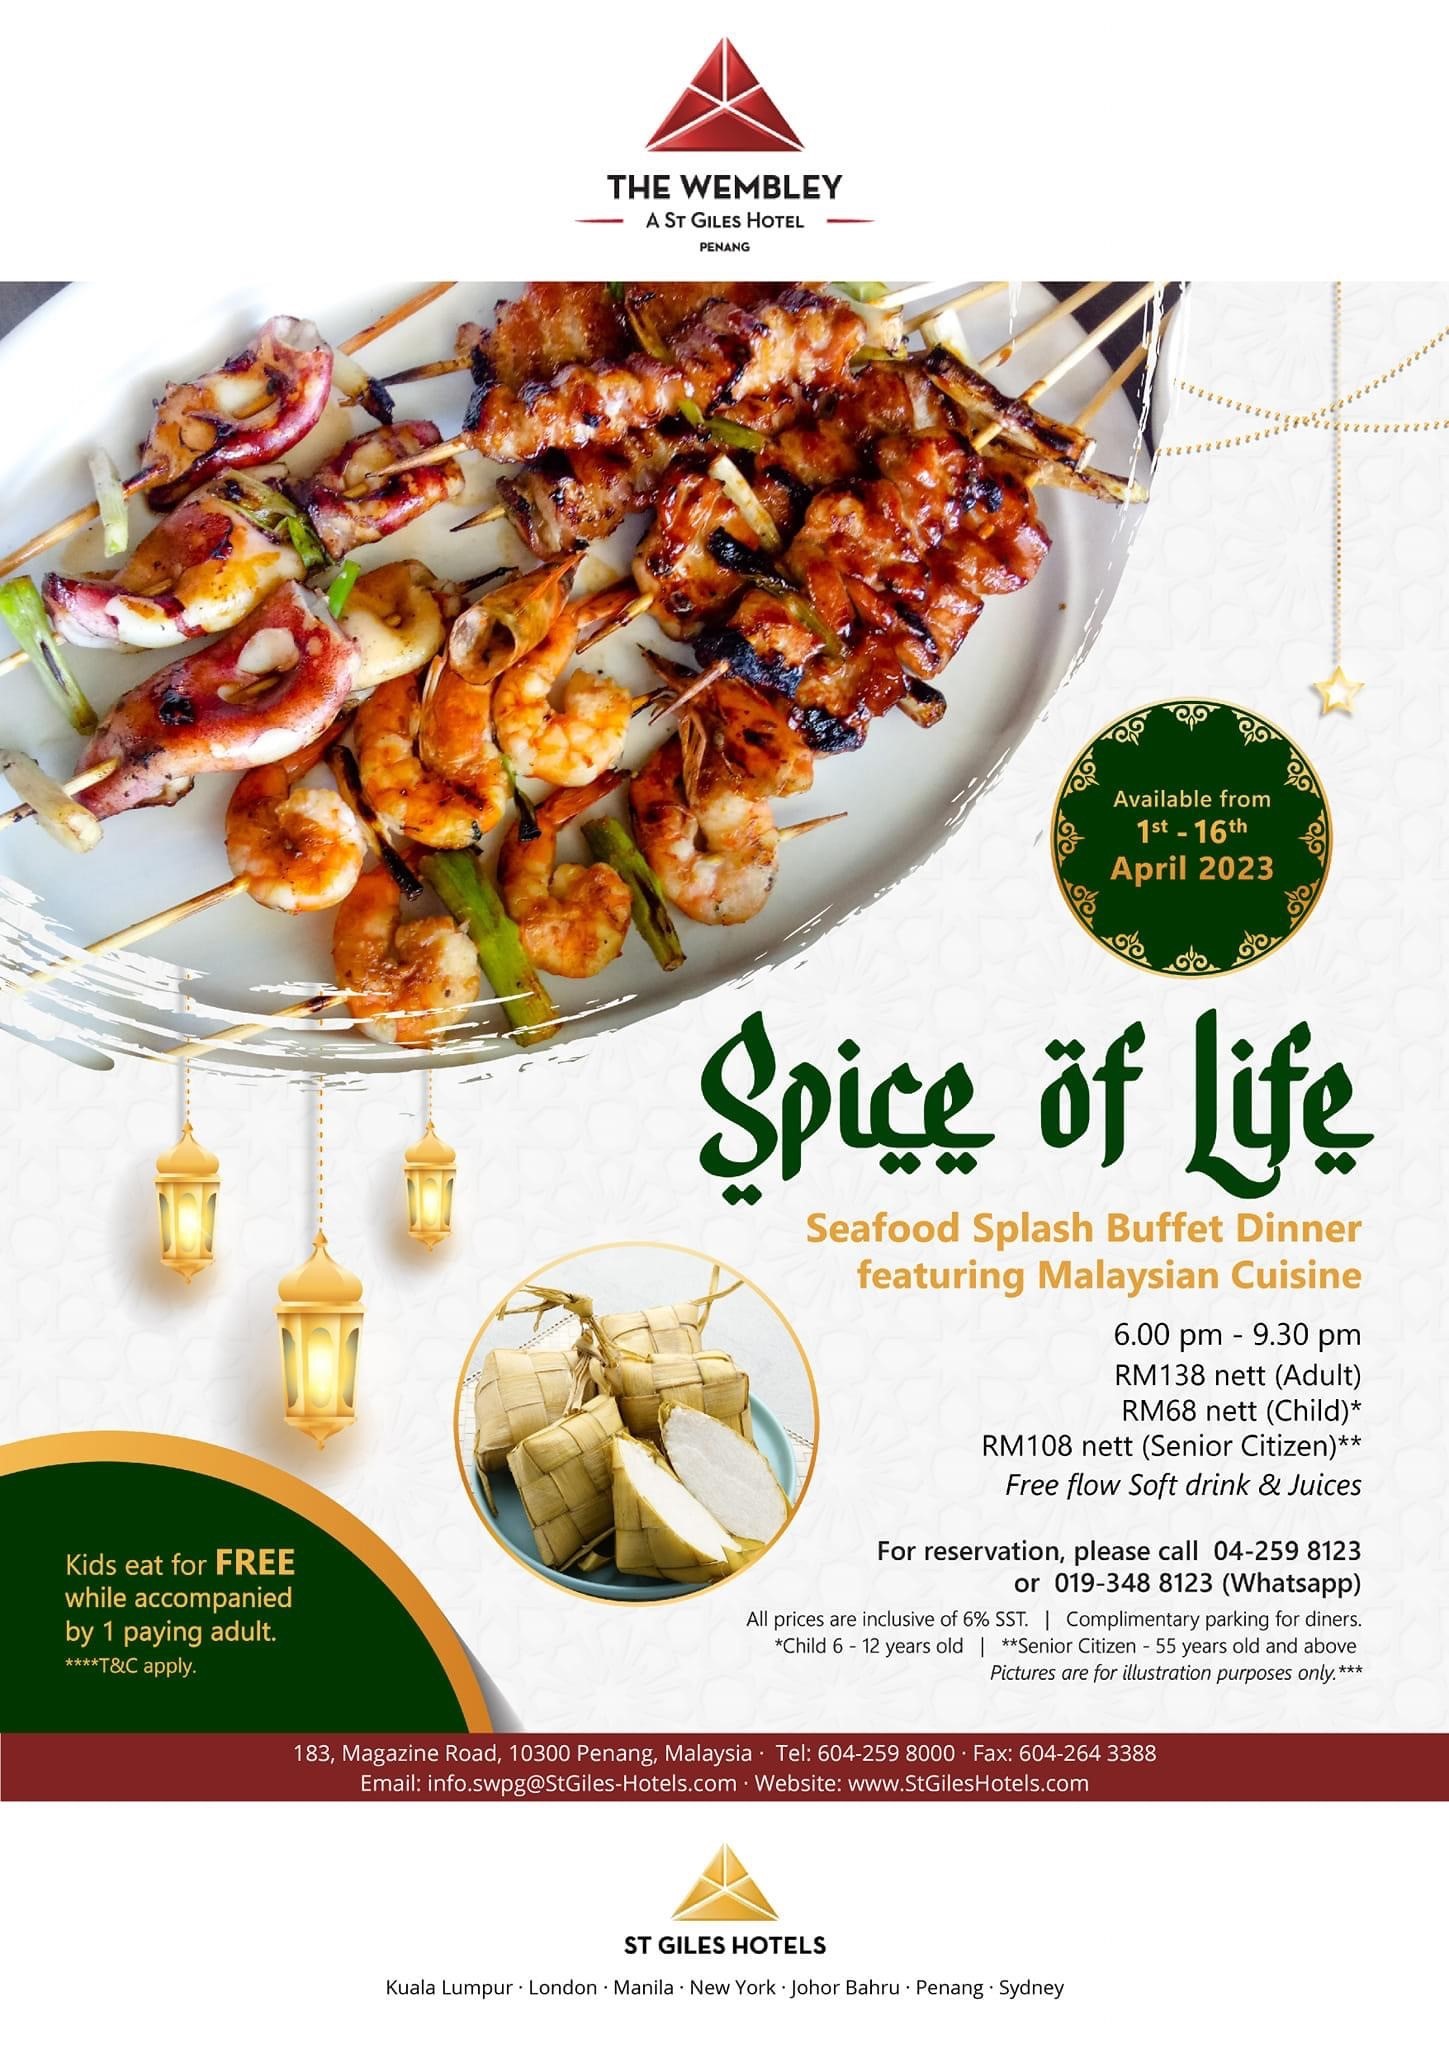 Spice Of Life featuring Malaysian Cuisine by The Wembley, A St Giles Hotel